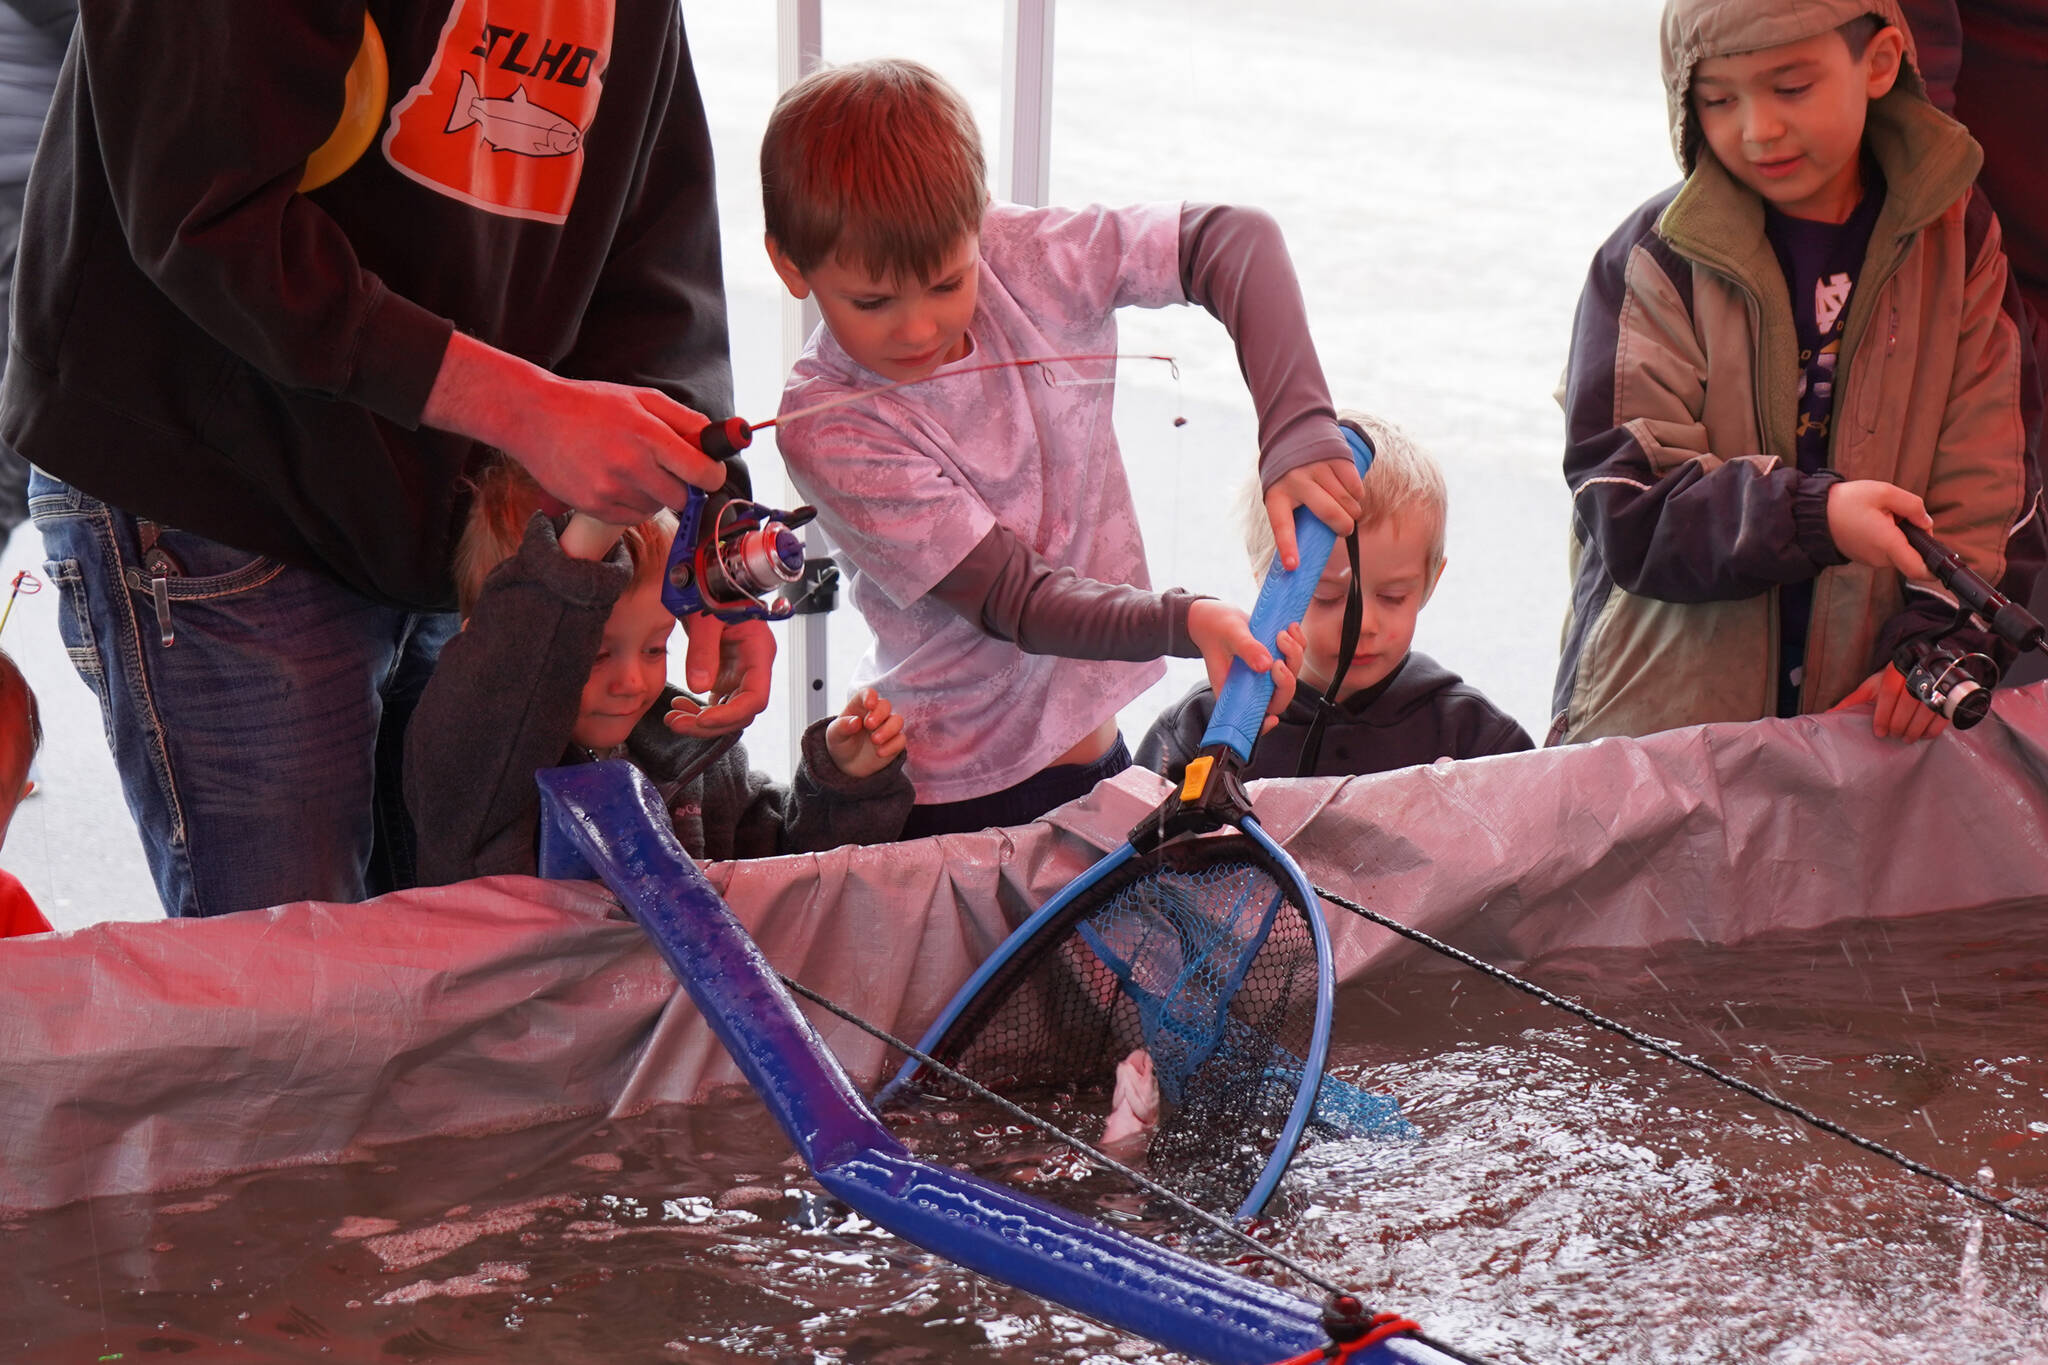 Children work together to land a rainbow trout at the Kenai Peninsula Sport, Rec & Trade Show on Saturday, May 6, 2023, at the Soldotna Regional Sports Complex in Soldotna, Alaska. (Jake Dye/Peninsula Clarion)